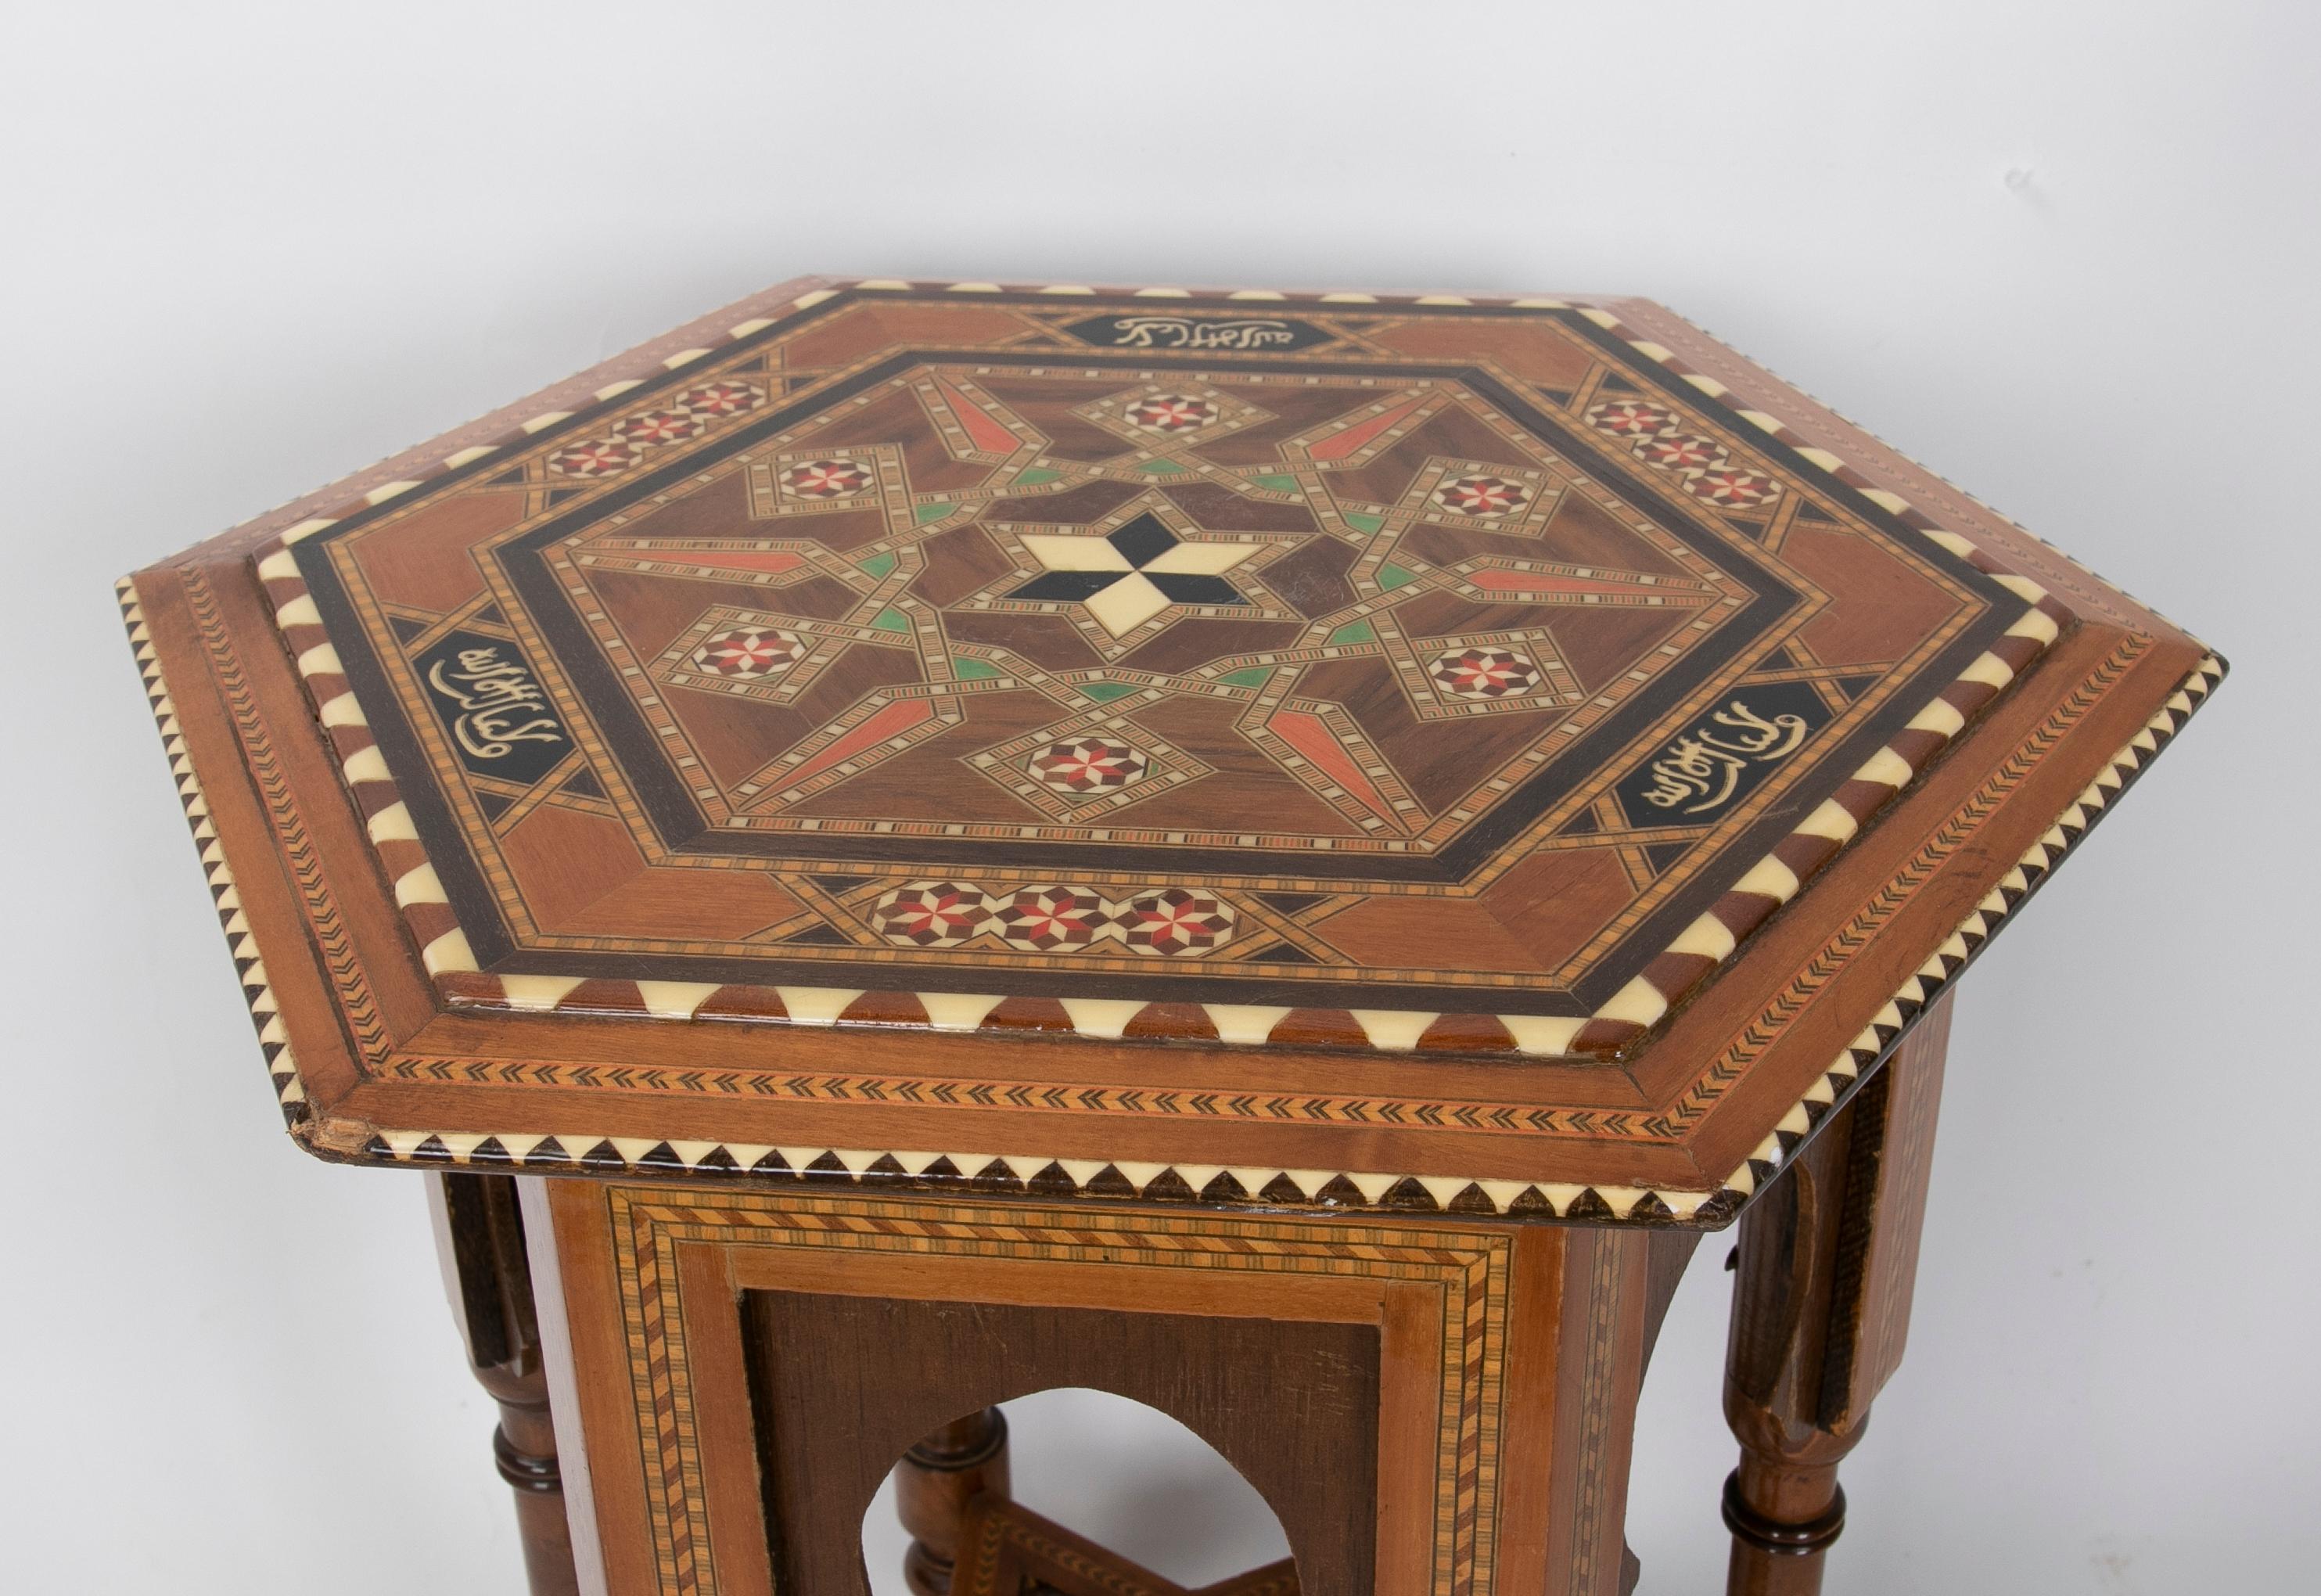 20th Century Wooden Side Table with Arabic Style Inlays